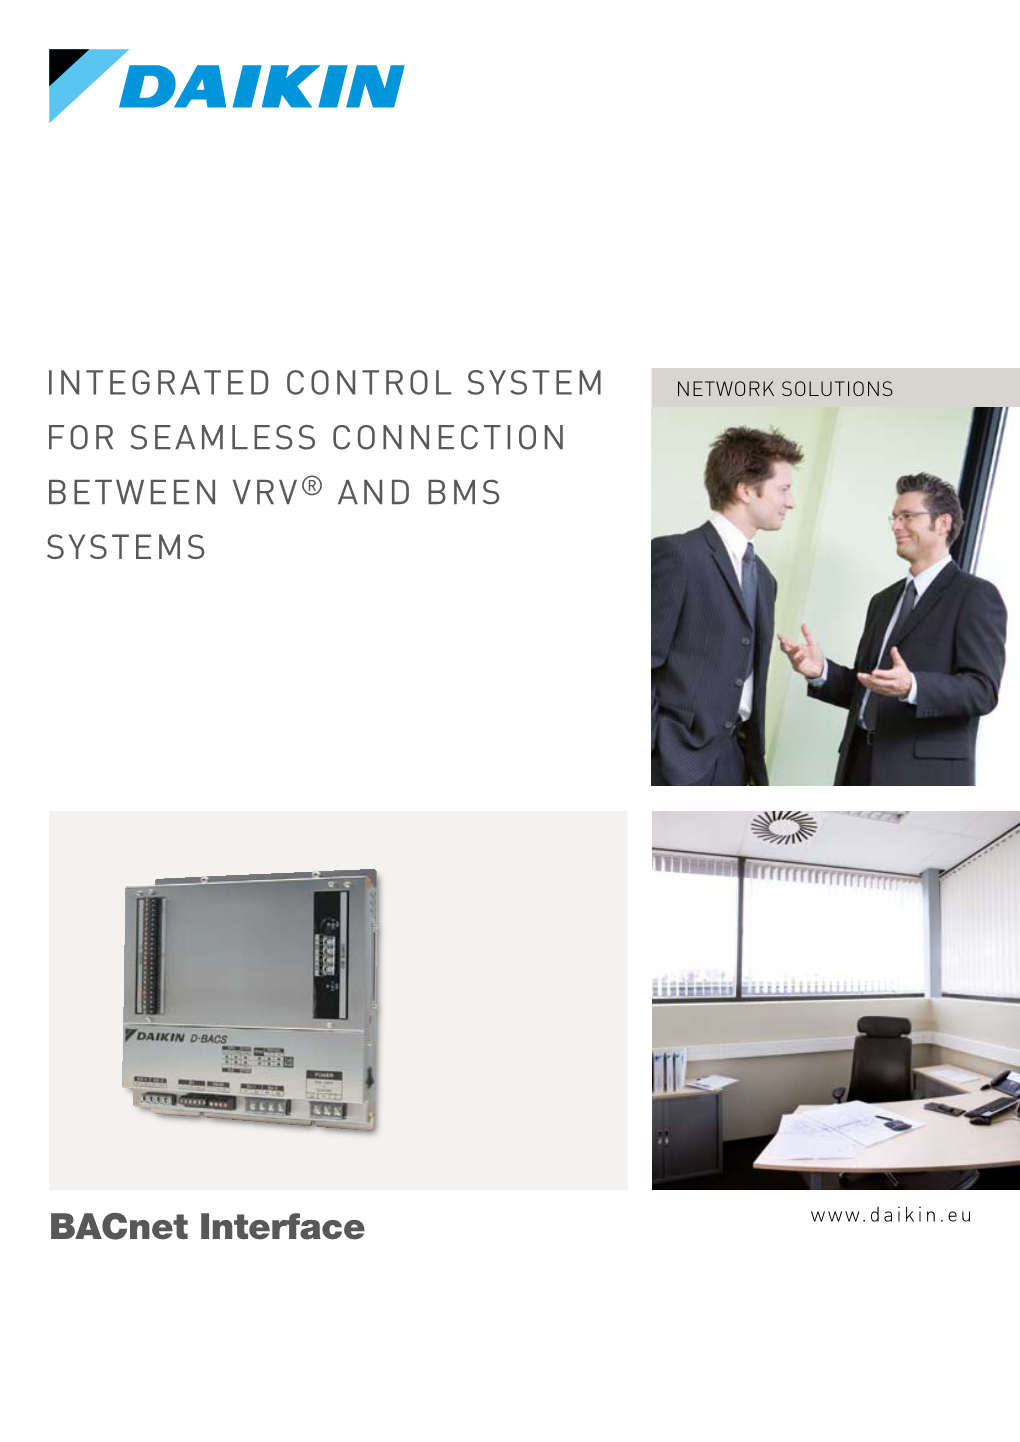 Bacnet Interface Main Features